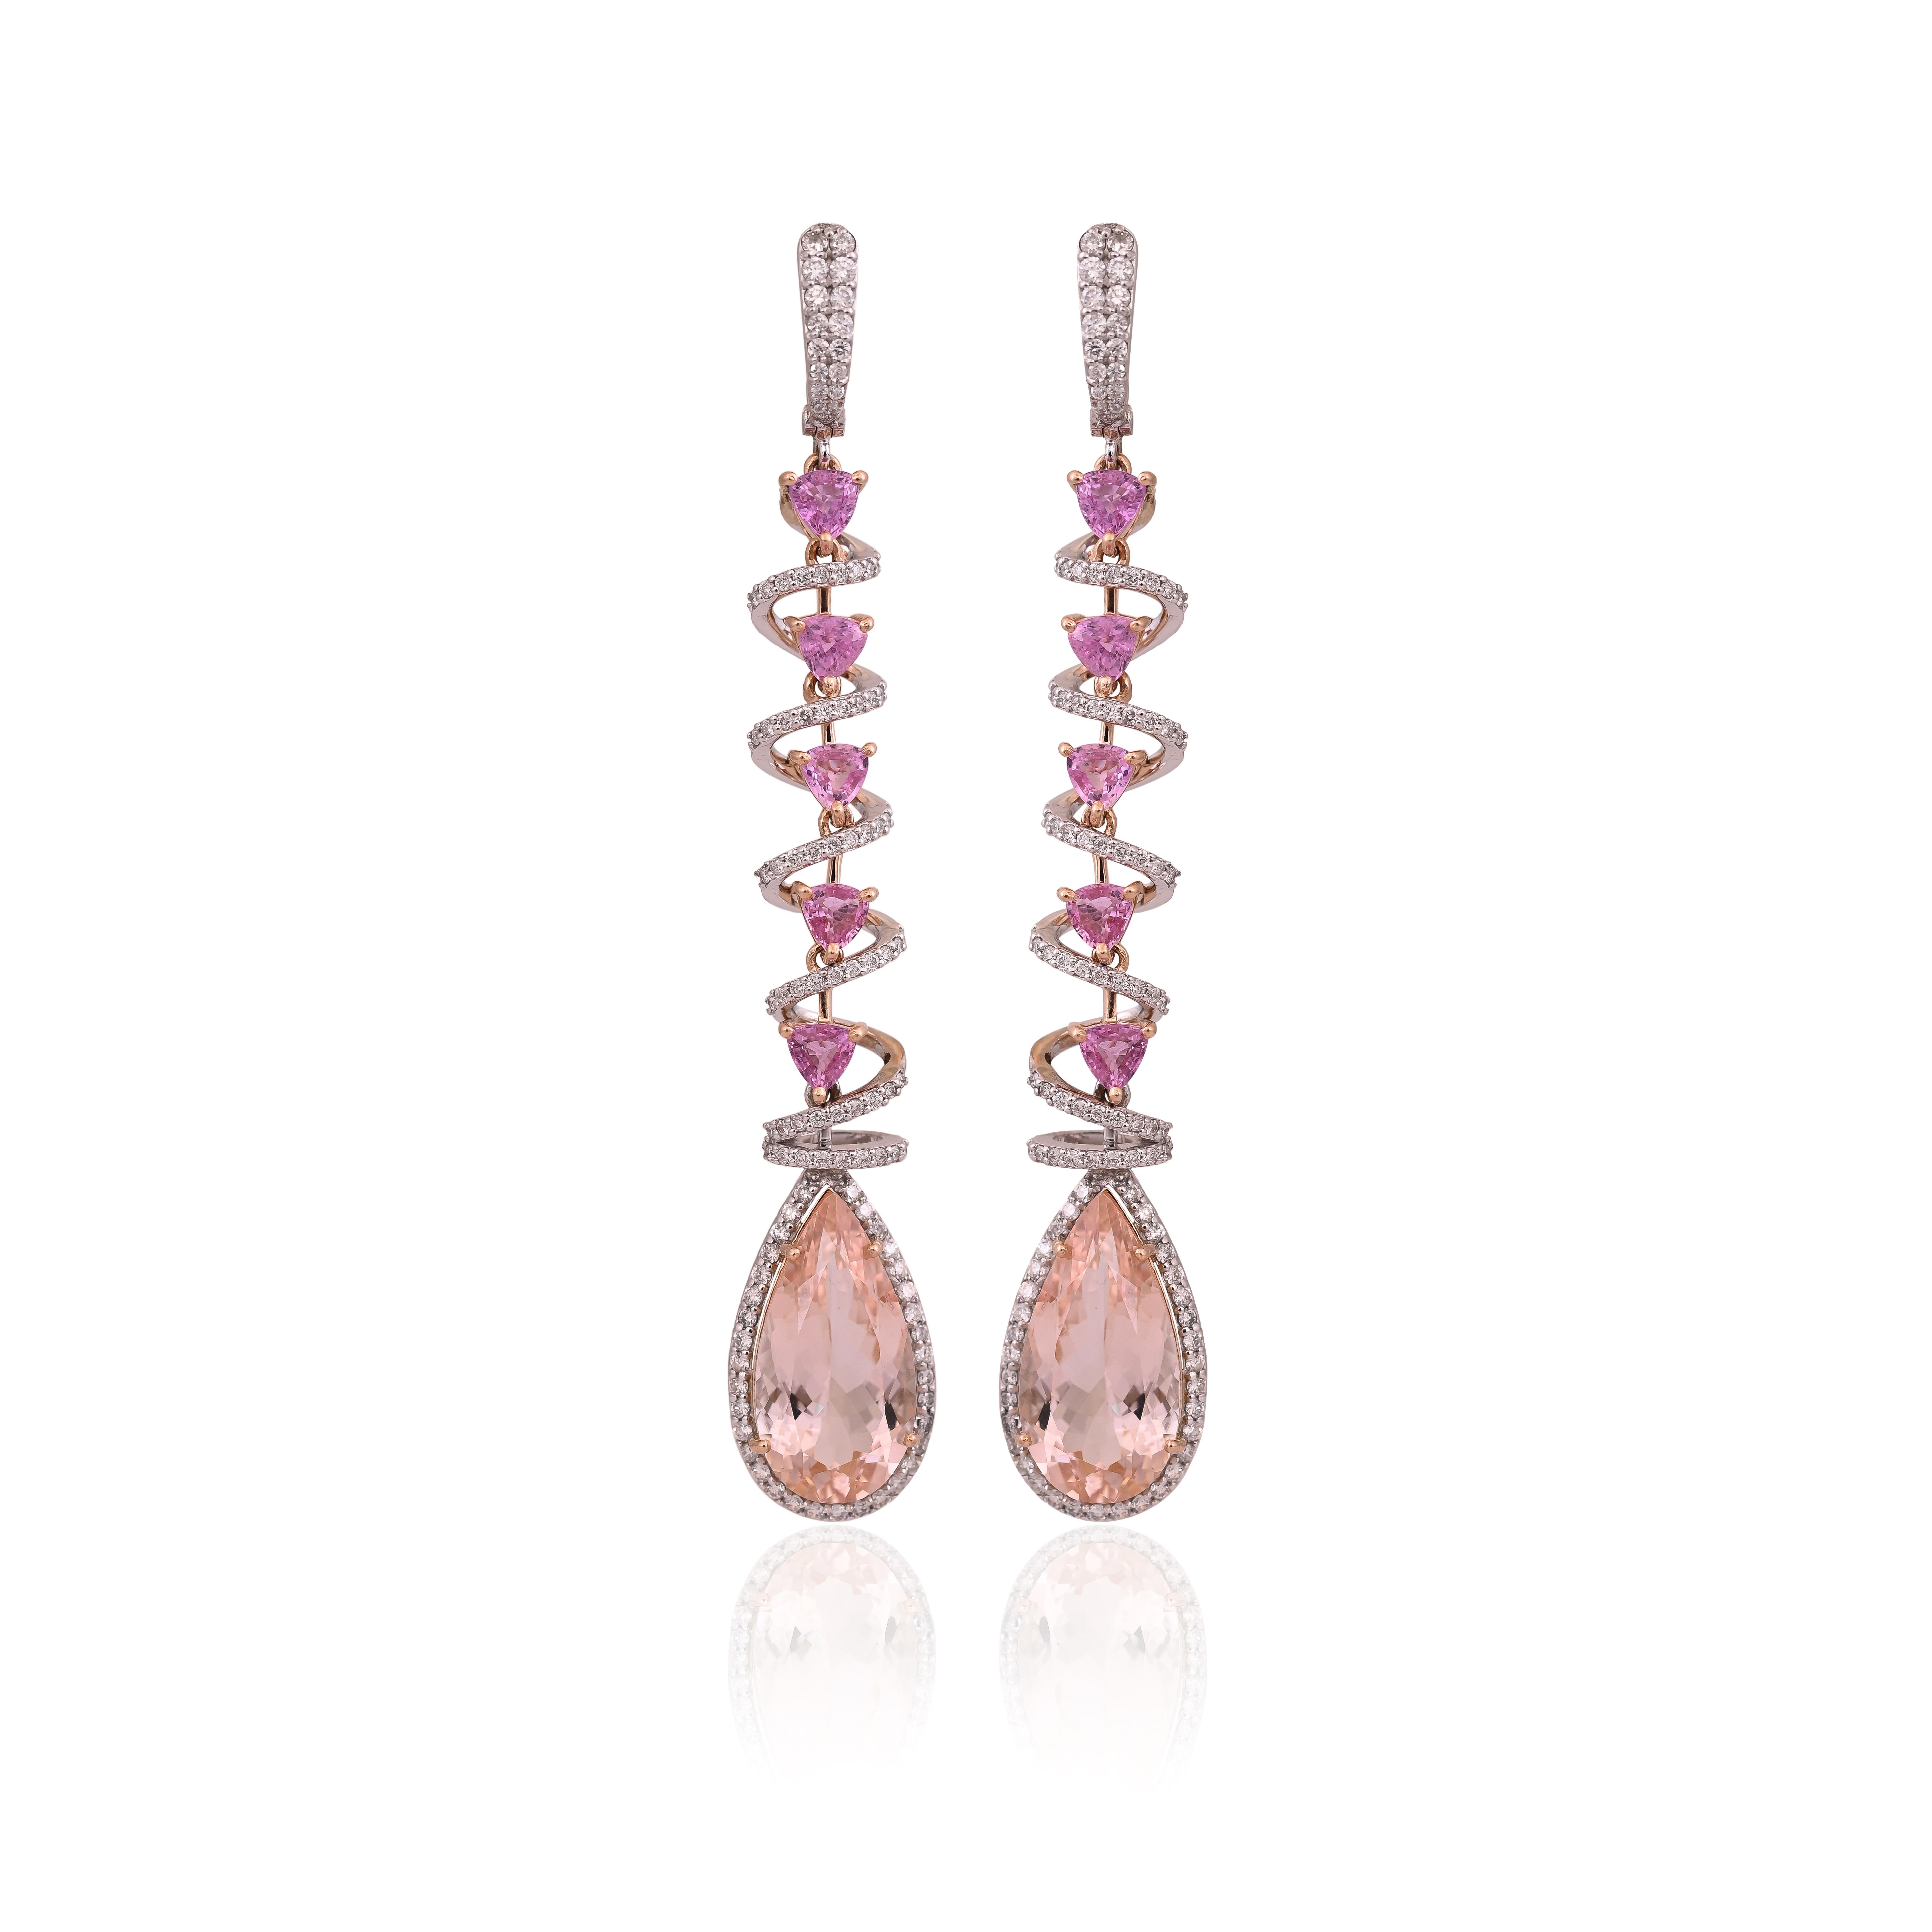 A very gorgeous and one of a kind, Morganite & Pink Sapphire Chandelier Earrings set in 18K Rose Gold & Diamonds. The weight of the pear shaped Morganites is 13.14 carats. The weight of the Pink Sapphires is 3.03 carats. The Pink Sapphires are of